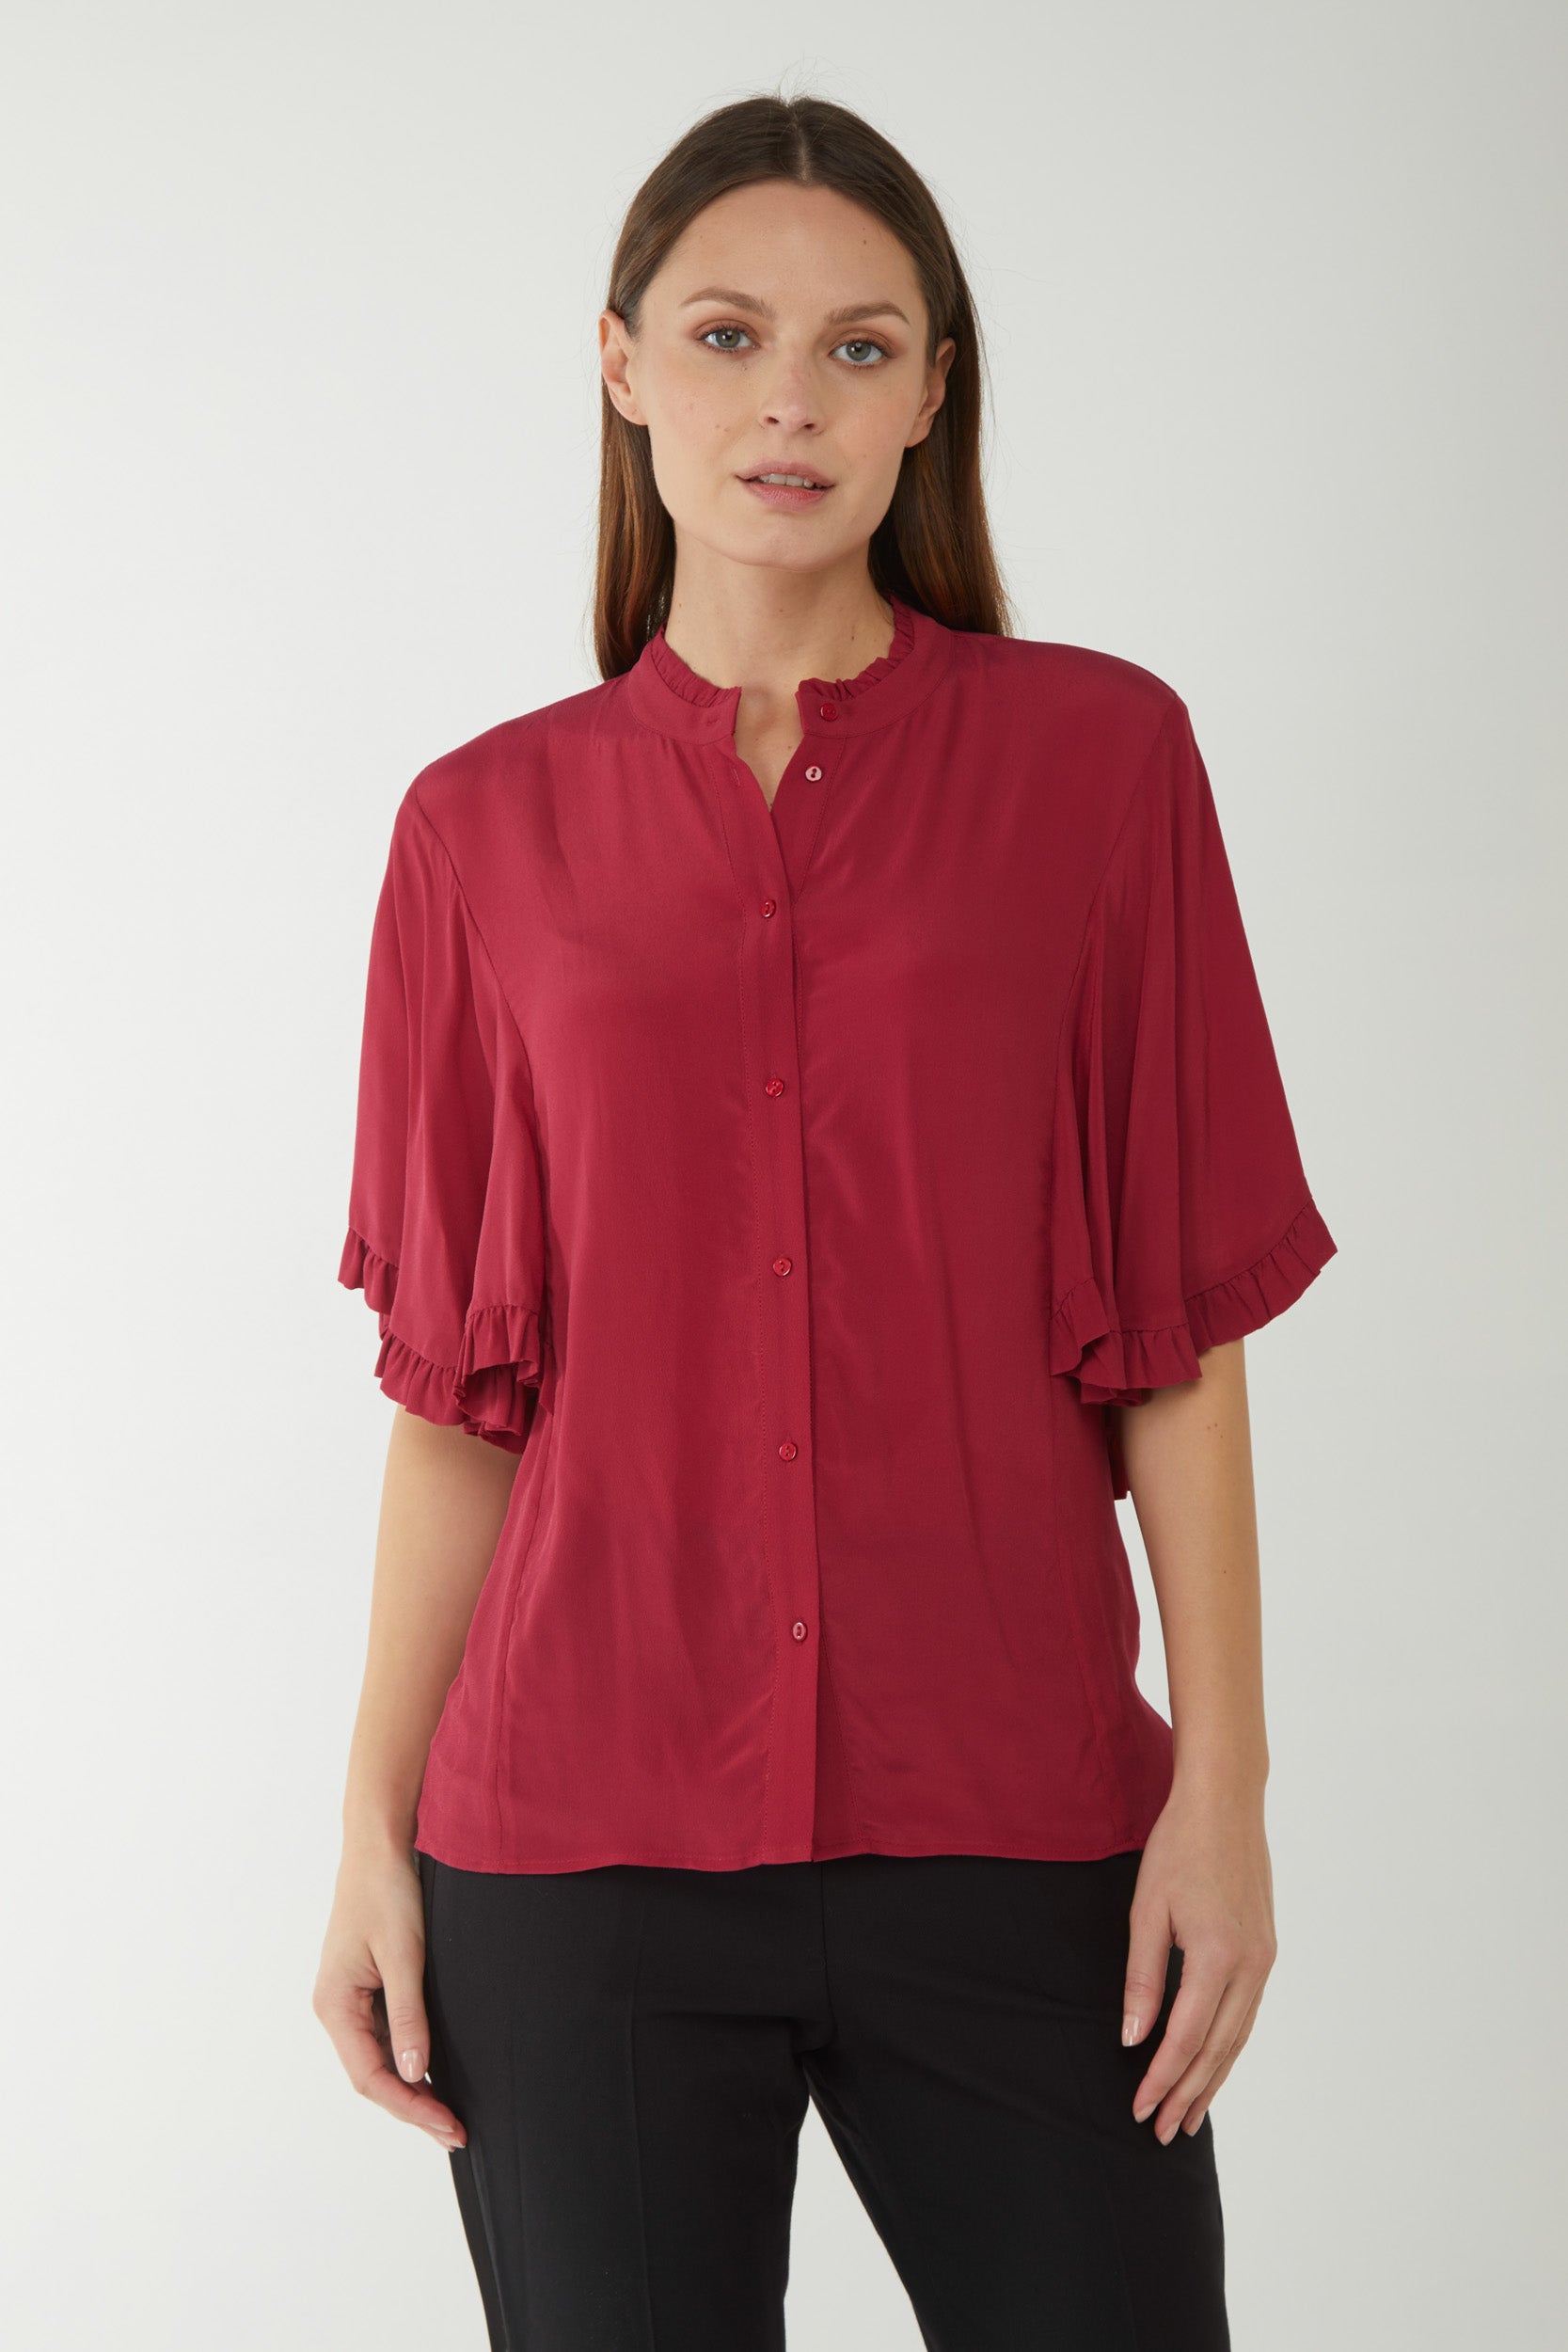 TWINSET Shirt in Red Crepe de Chine